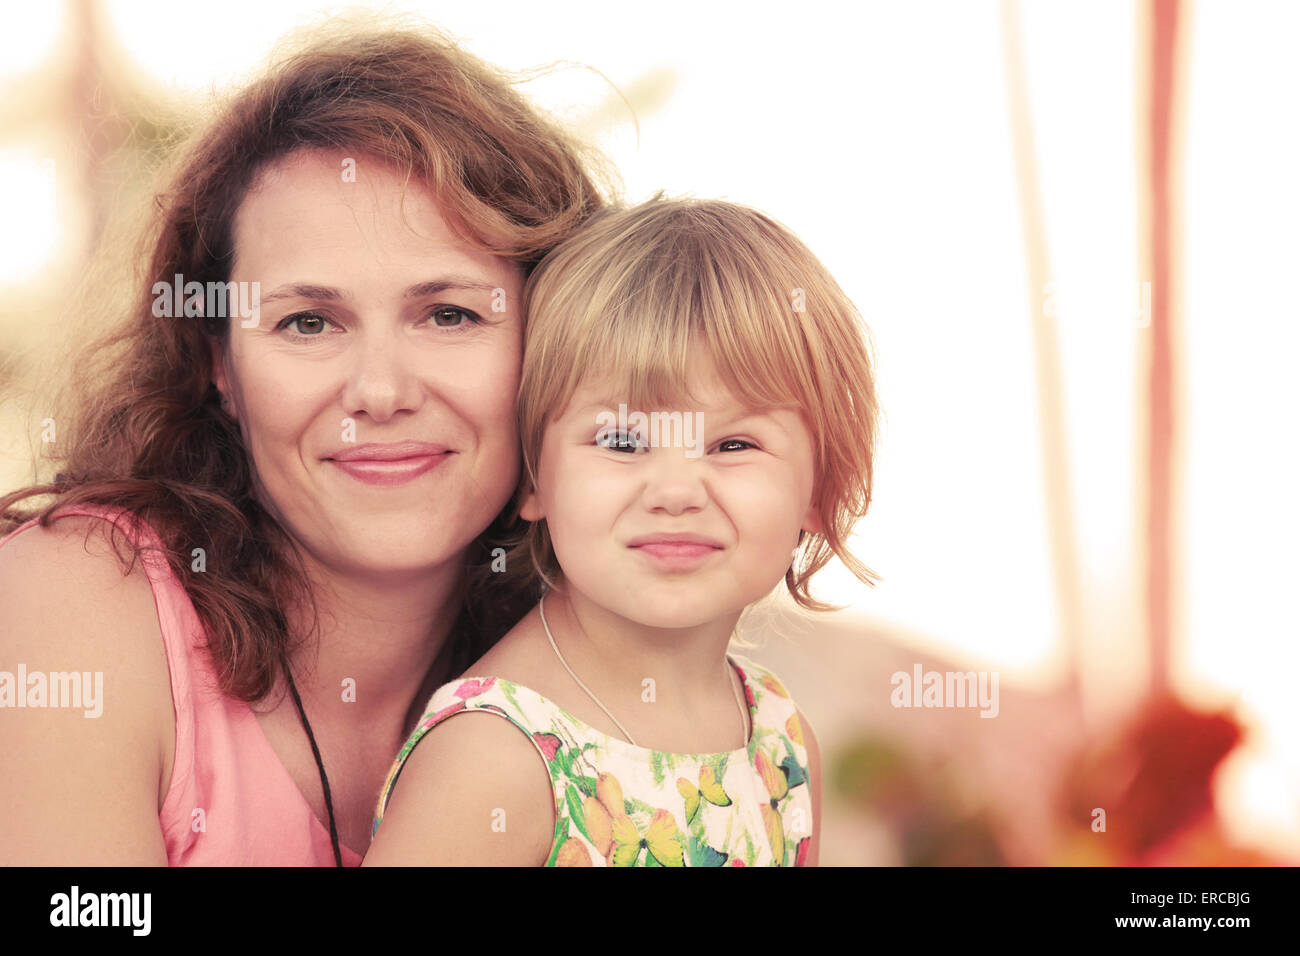 Outdoor summer evening portrait of a real Caucasian family, young mother with her small cute daughter, warm toned photo, old sty Stock Photo